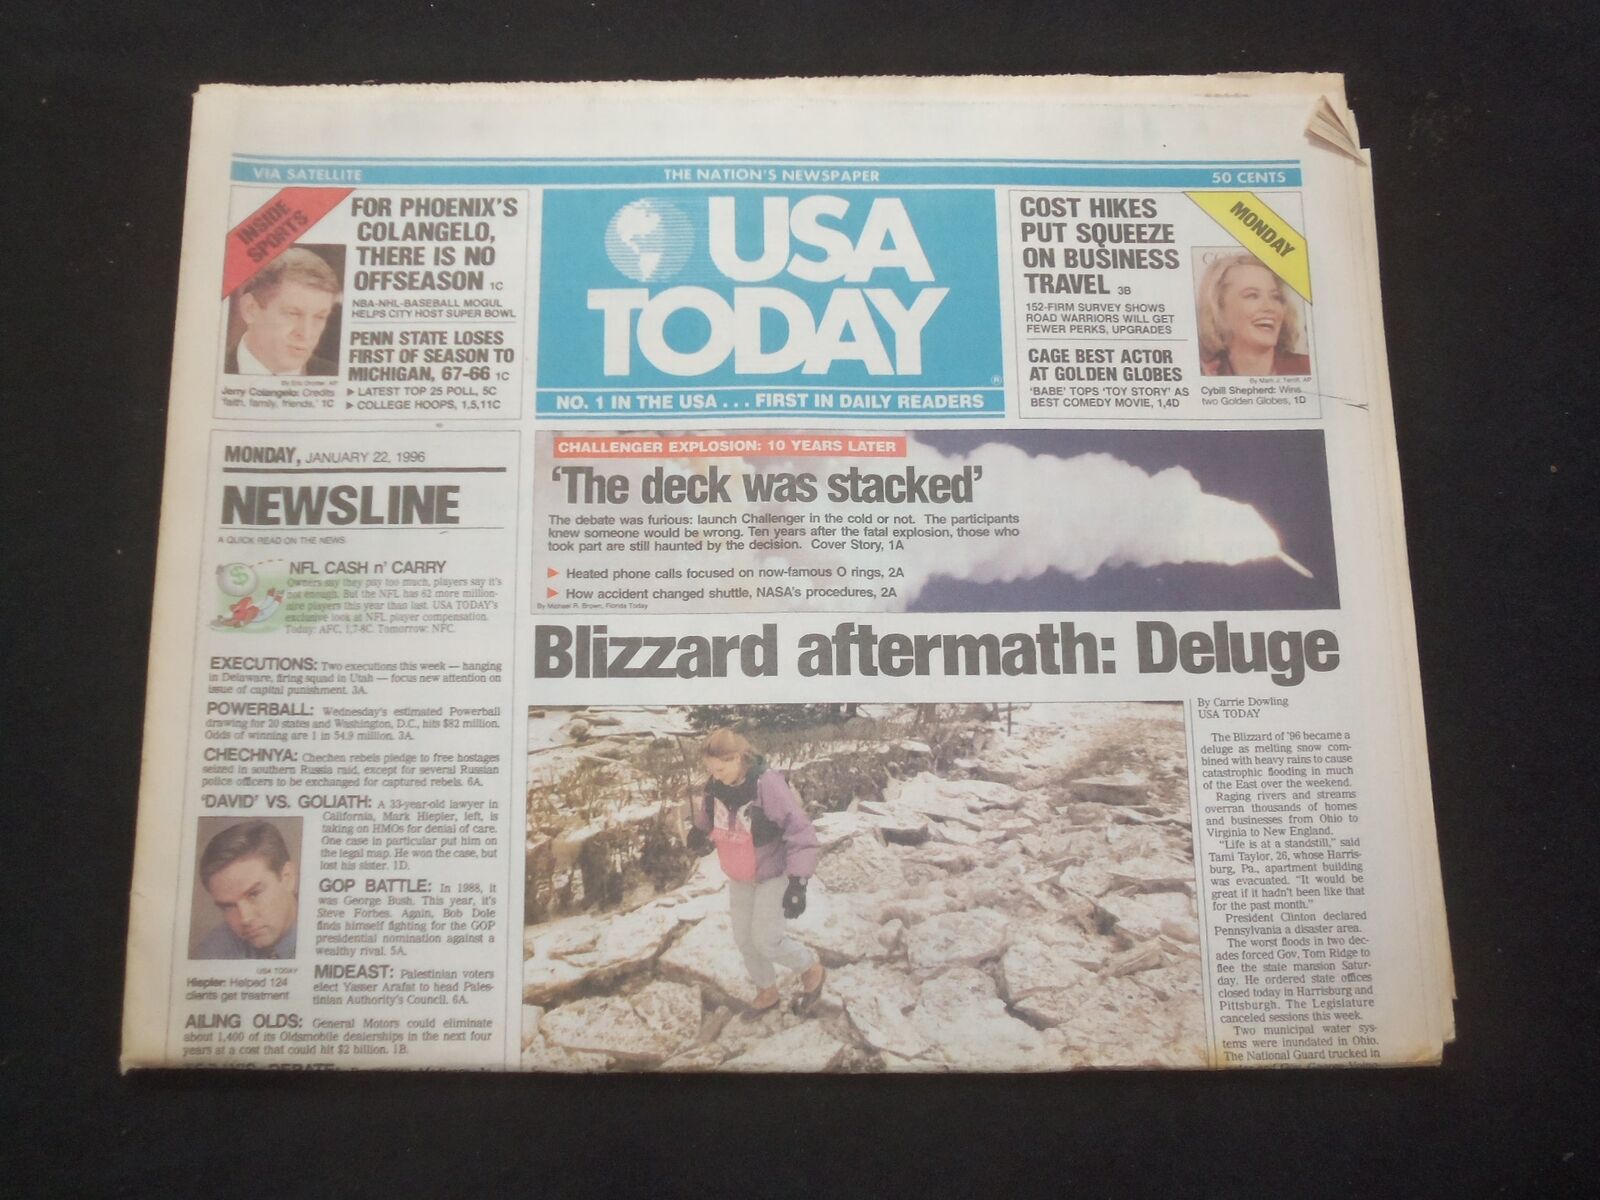 1996 JANUARY 22 USA TODAY NEWSPAPER - BLIZZARD AFTERMATH: DELUGE - NP 7809